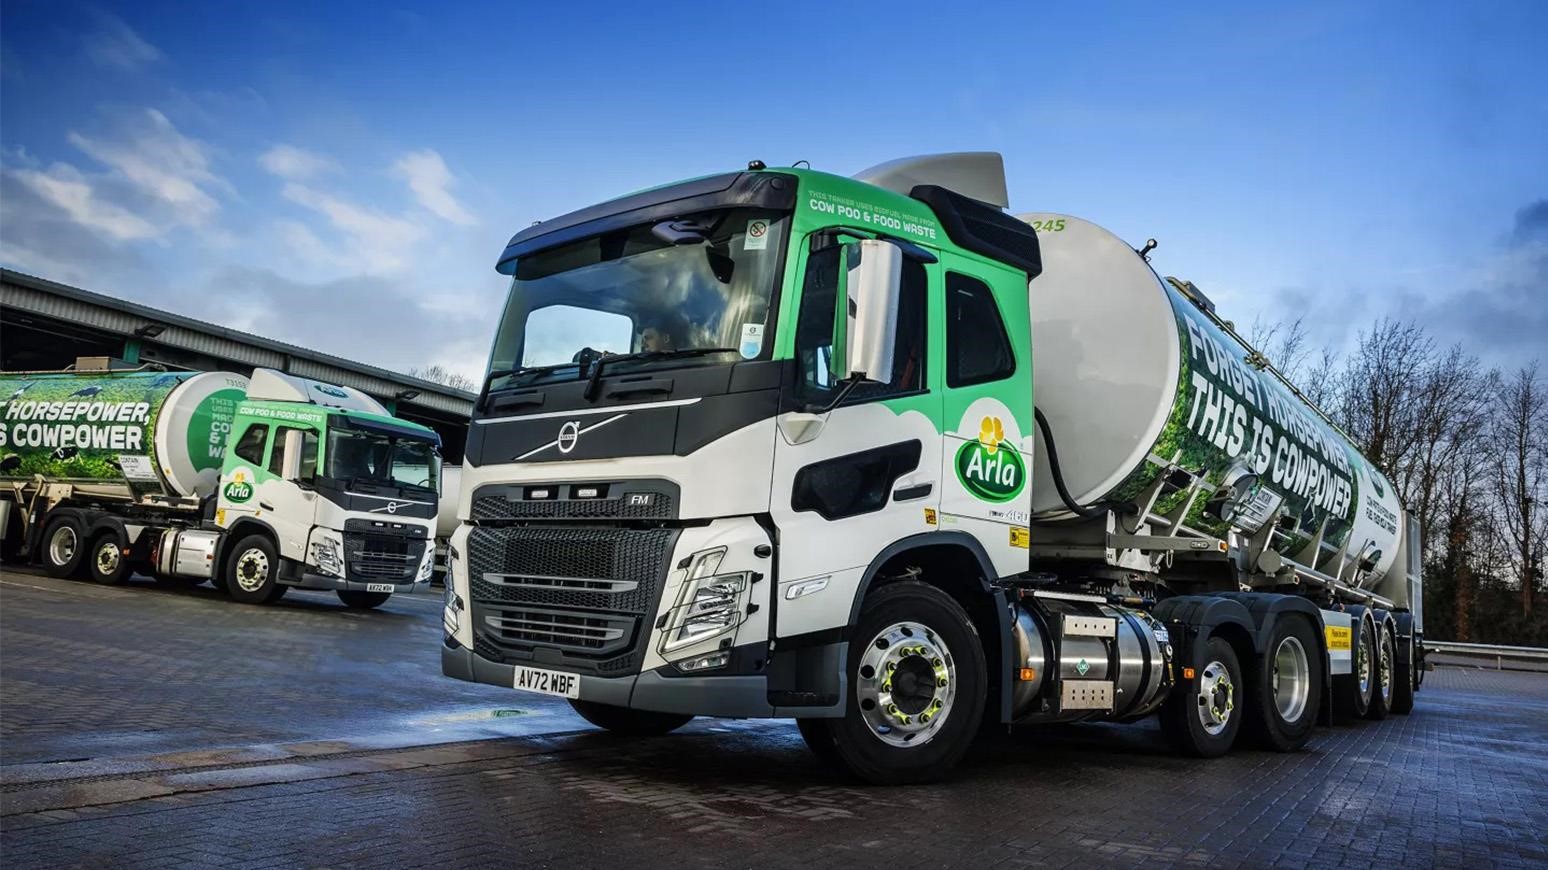 Arla Foods Achieves Dramatic Carbon Emissions Reduction With New LNG-Powered Trucks From Volvo